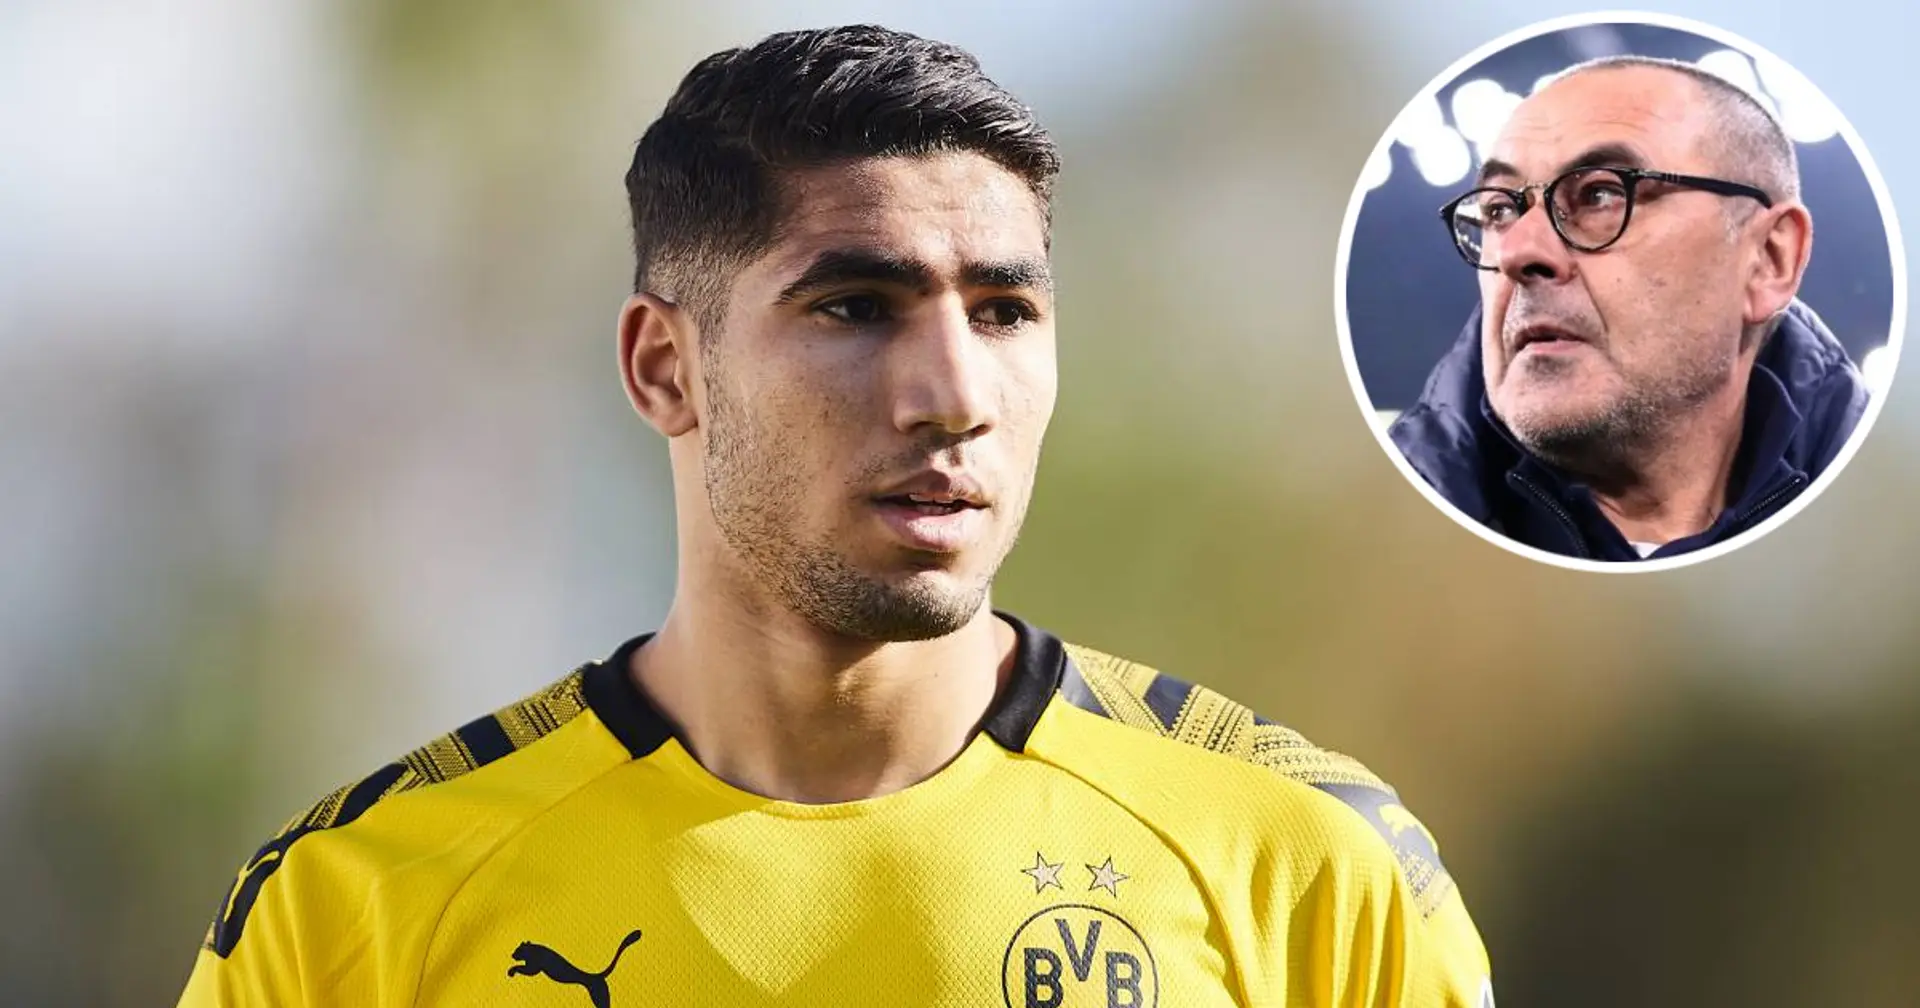 Juventus are reportedly eyeing a move for Achraf Hakimi